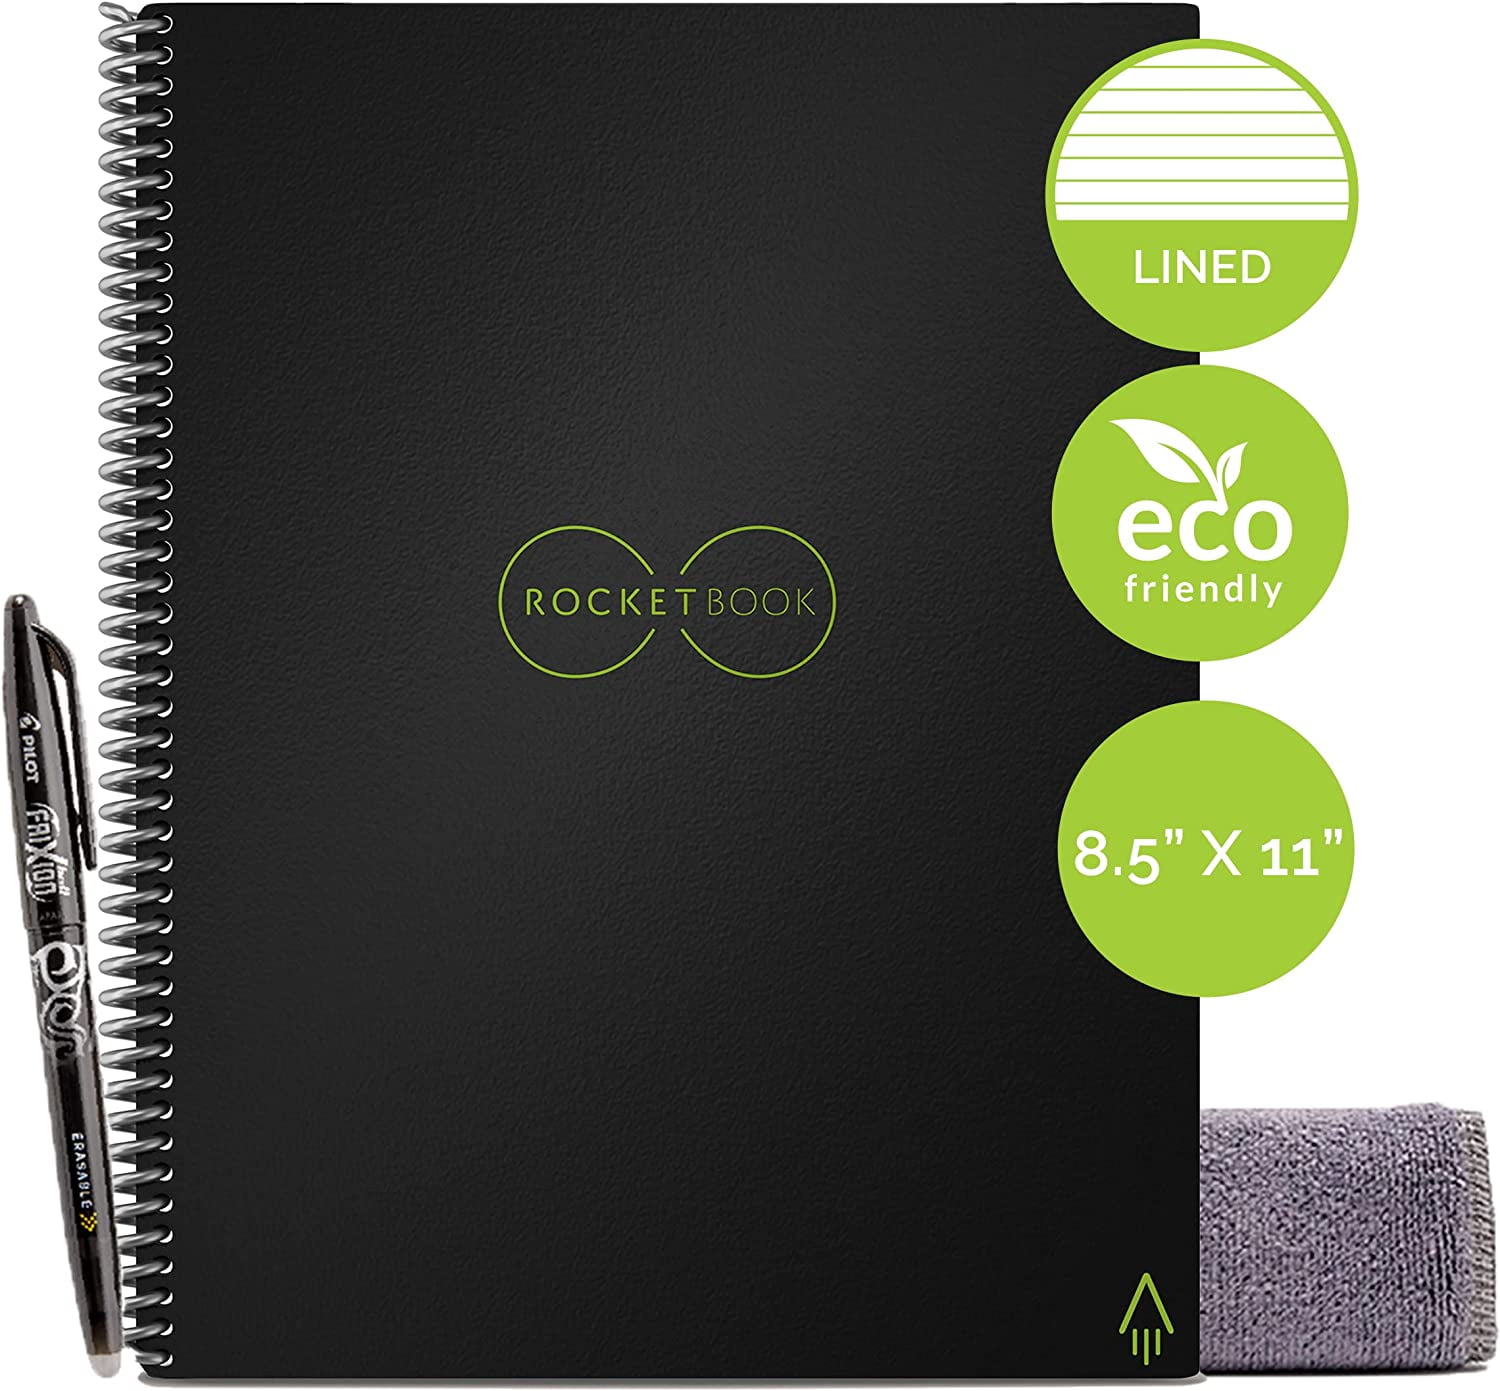 A4 Rocketbook Lined Smart Reusable Notebook, Shop Today. Get it Tomorrow!